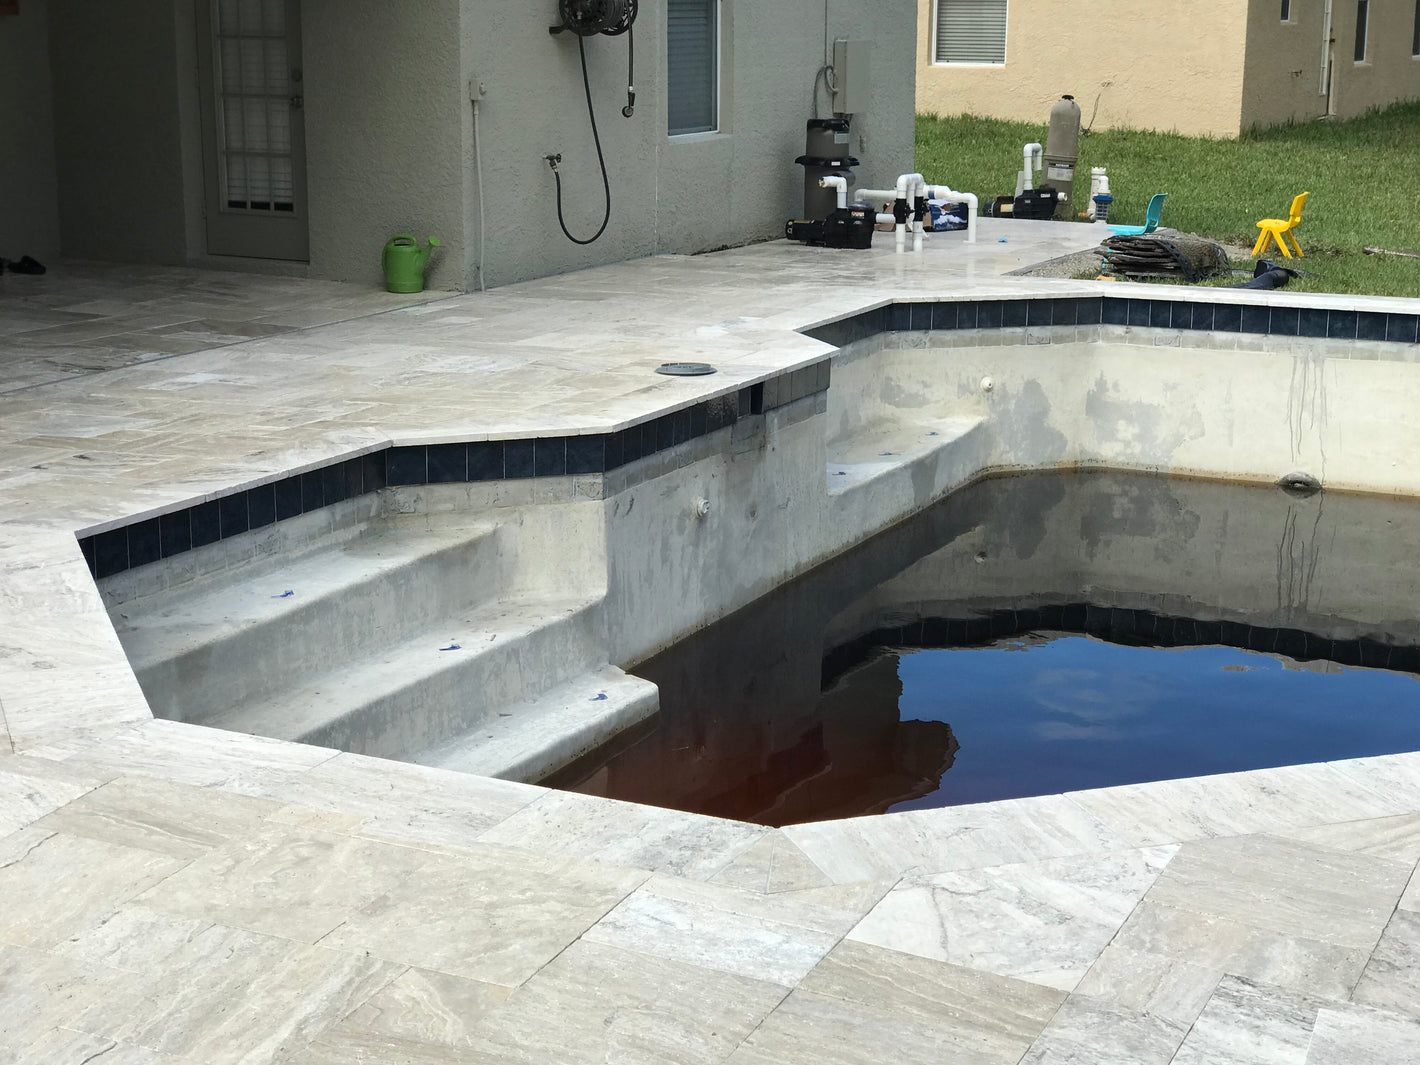 Travertine pool deck and coping plus in-pool tile